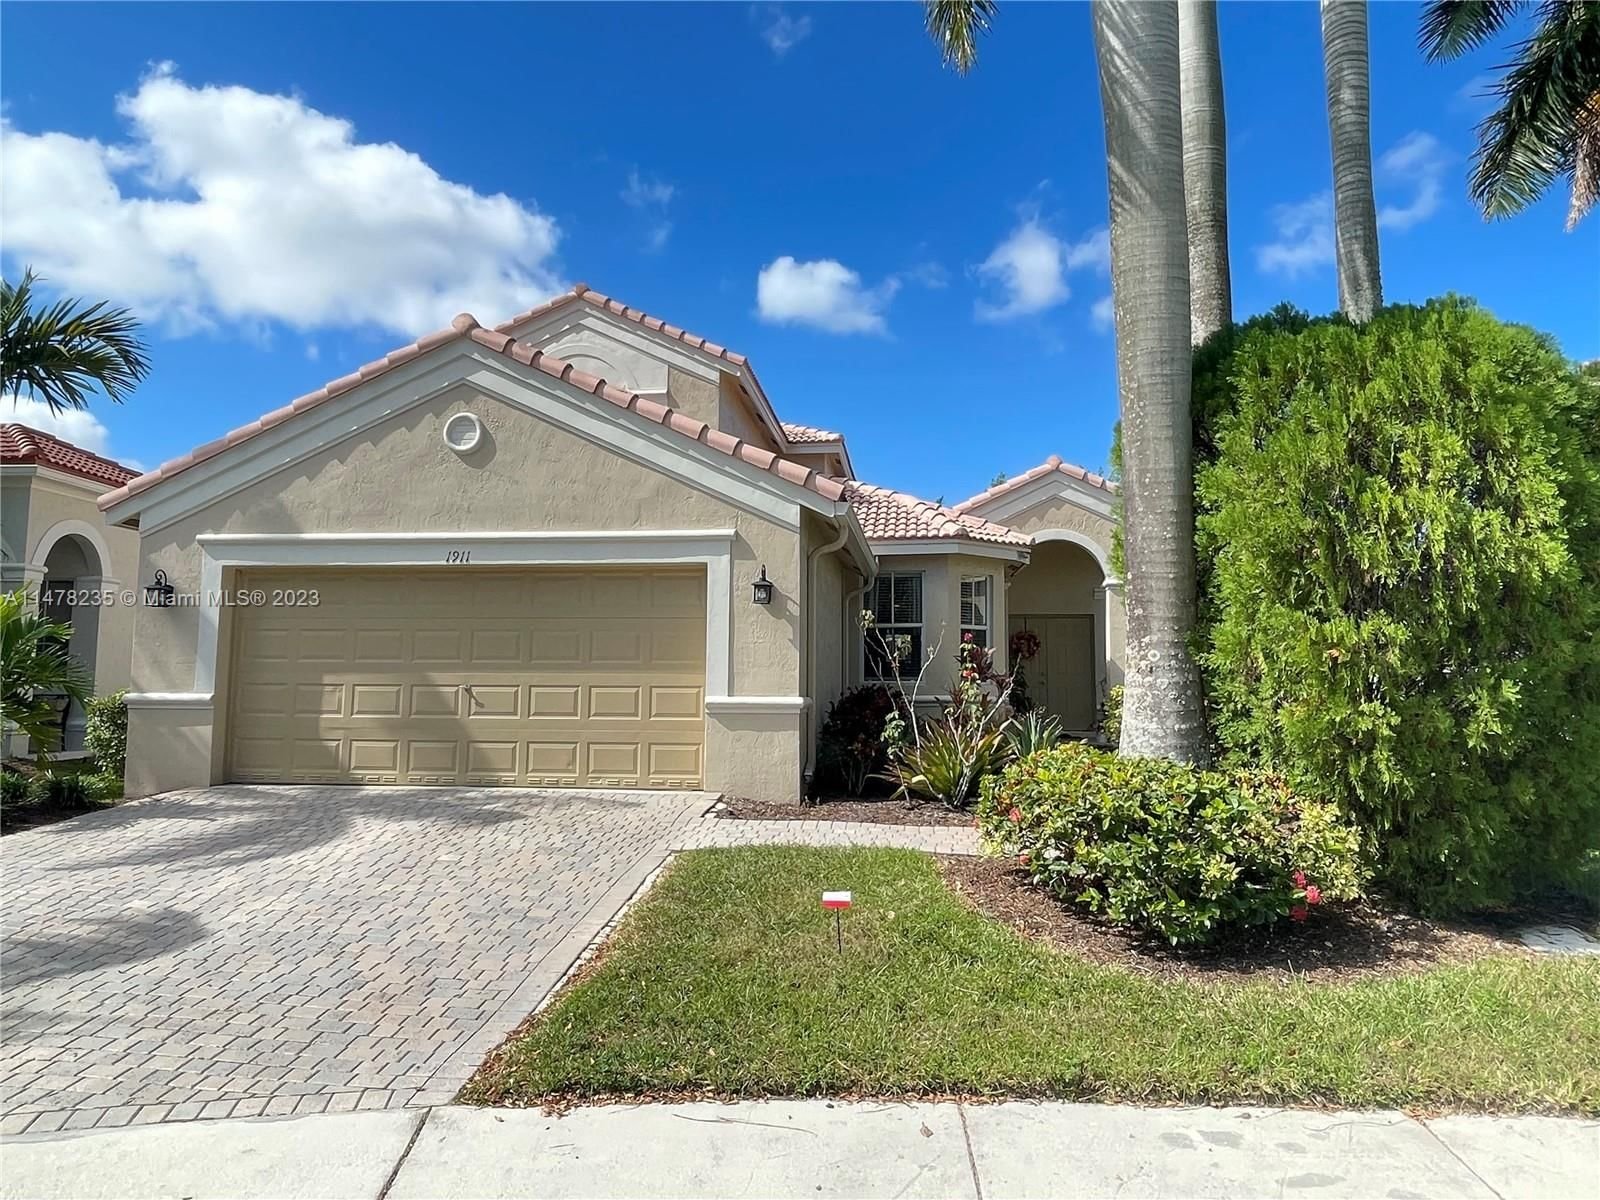 Real estate property located at 1911 Cedar Ct, Broward County, SECTOR 2- PARCELS 21B 22, Weston, FL